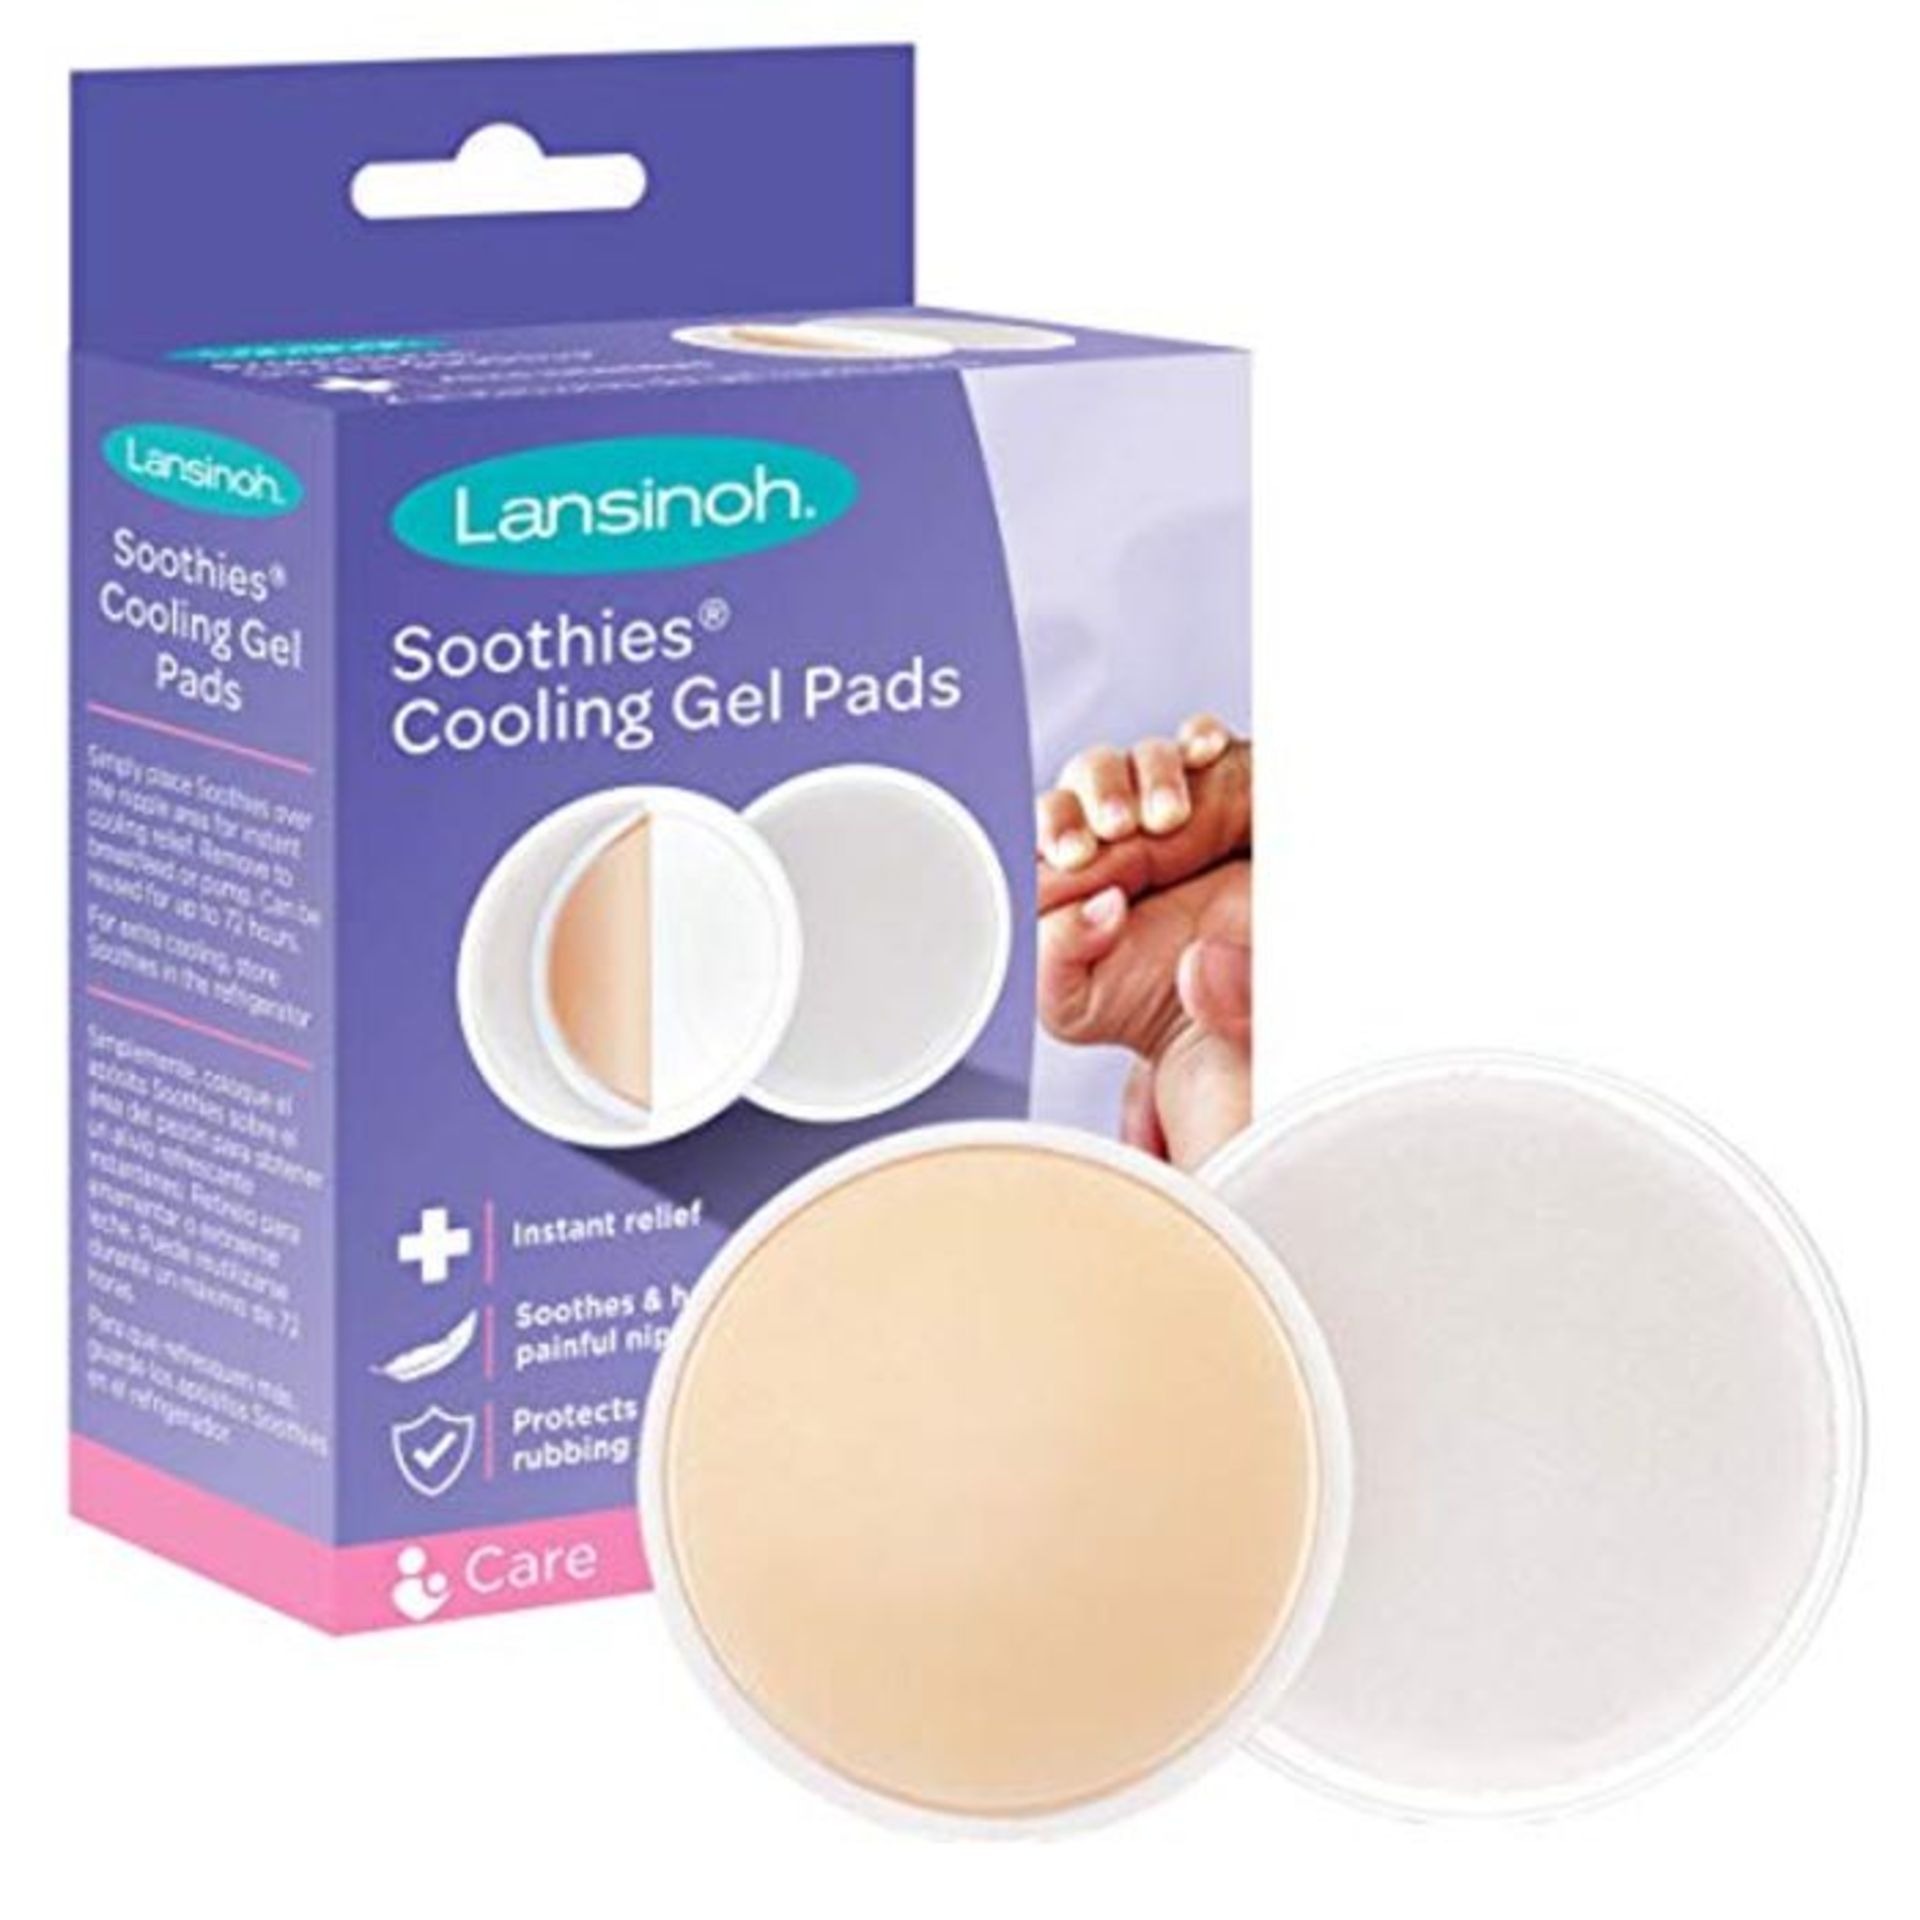 Lansinoh 65005p Soothies Gel Pad for Breastfeeding Mother, Instant Cooling, Pain Relie